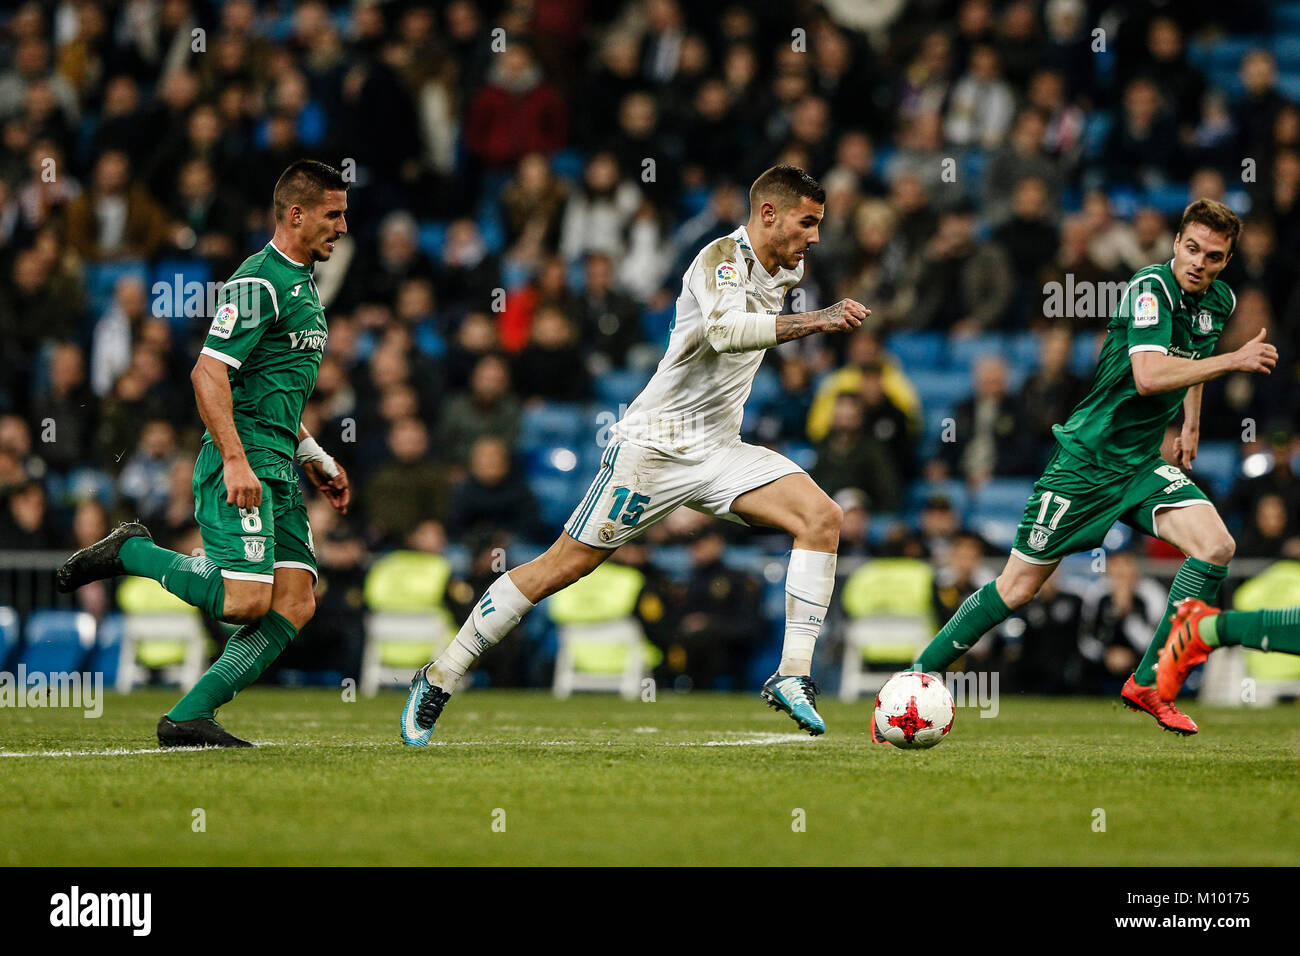 Theo Hernandez (Real Madrid) drives forward on the ball Javier Eraso (Leganes FC), Copa del Rey match between Real Madrid vs Leganes FC at the Santiago Bernabeu stadium in Madrid, Spain, January 23, 2018. Credit: Gtres Información más Comuniación on line, S.L./Alamy Live News Stock Photo